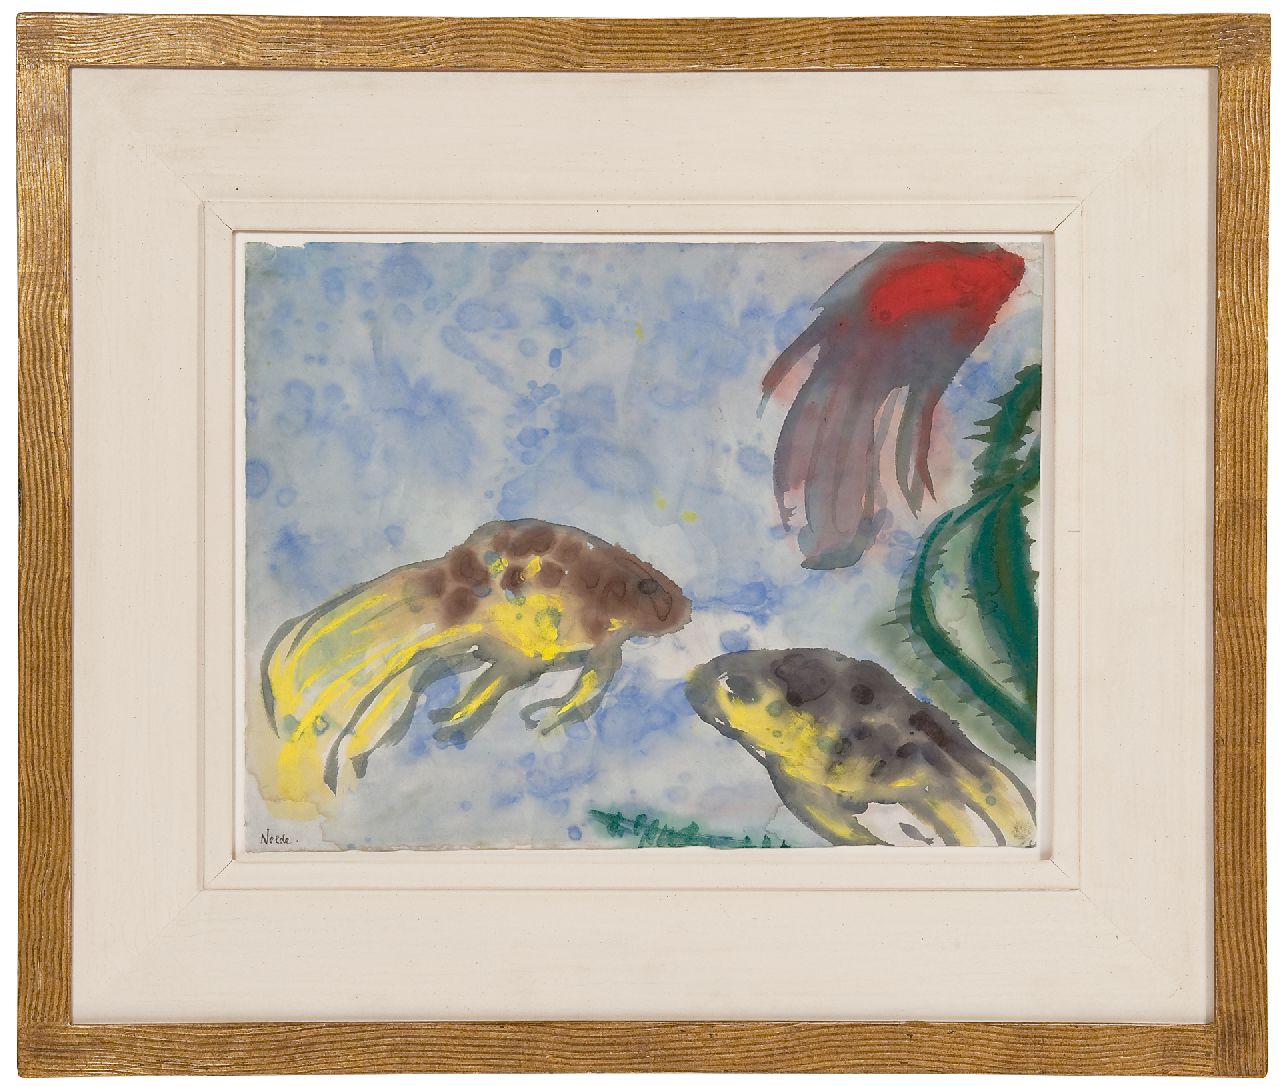 Nolde (Hans Emil Hansen) H.E.  | Hans 'Emil' Nolde (Hans Emil Hansen) | Watercolours and drawings offered for sale | Veiltails (Aquarium), watercolour on Japanese paper 35.8 x 47.0 cm, signed l.l. and executed in 'Berlin' 1923-1924